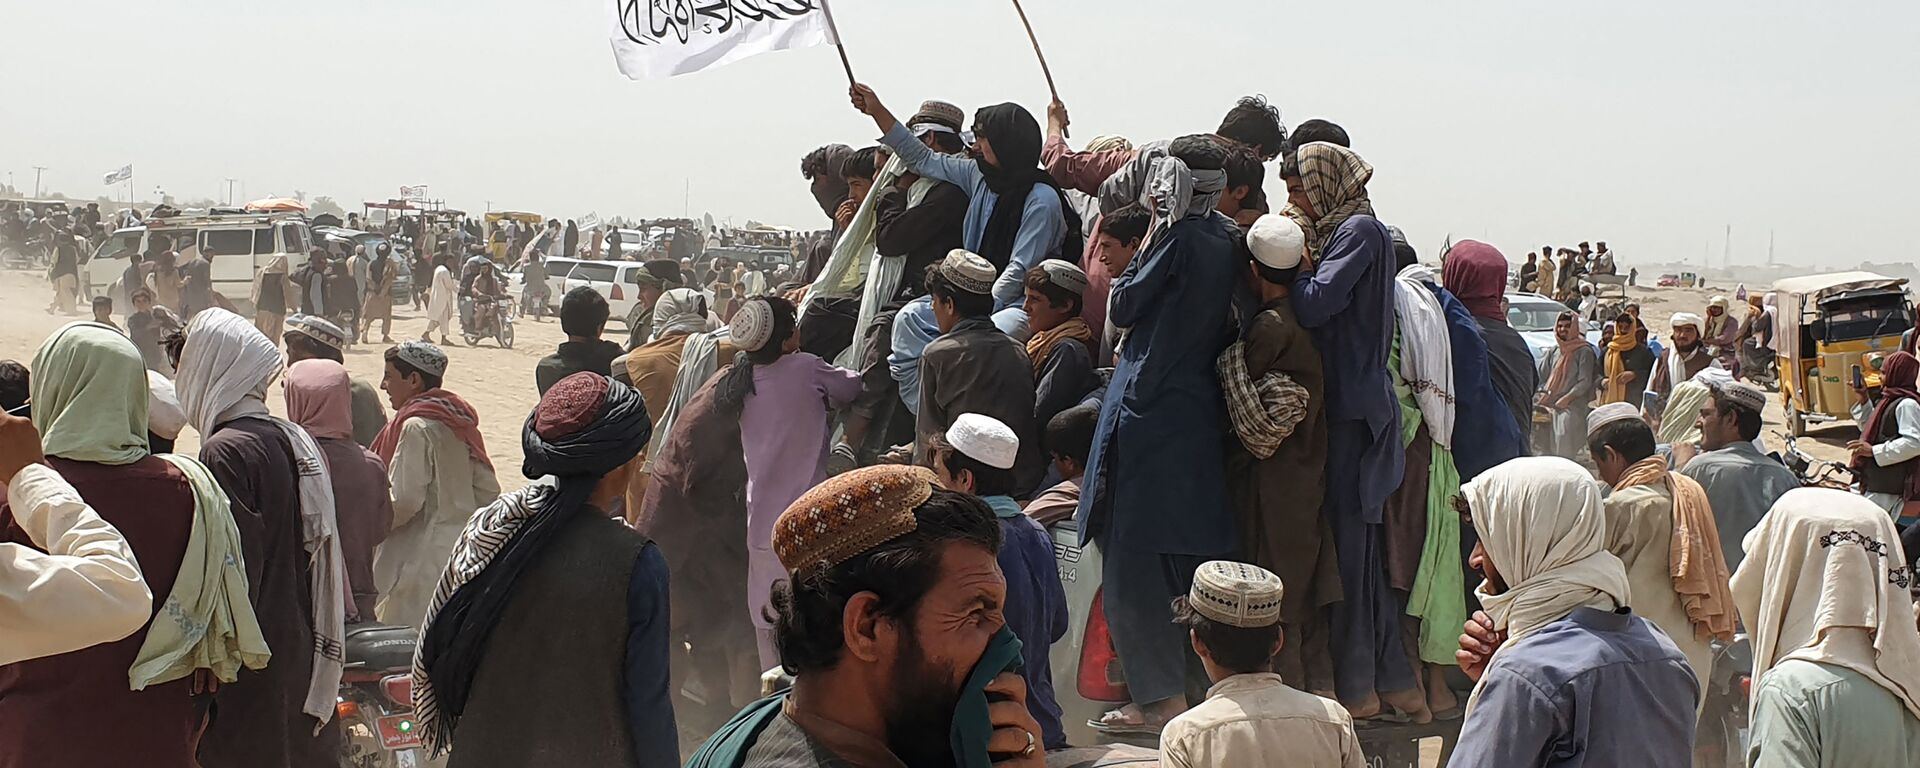 People wave Taliban flags as they drive through the Pakistani border town of Chaman on July 14, 2021, after the Taliban claimed they had captured the Afghan side of the border crossing of Spin Boldak along the frontier with Pakistan - Sputnik International, 1920, 23.07.2021